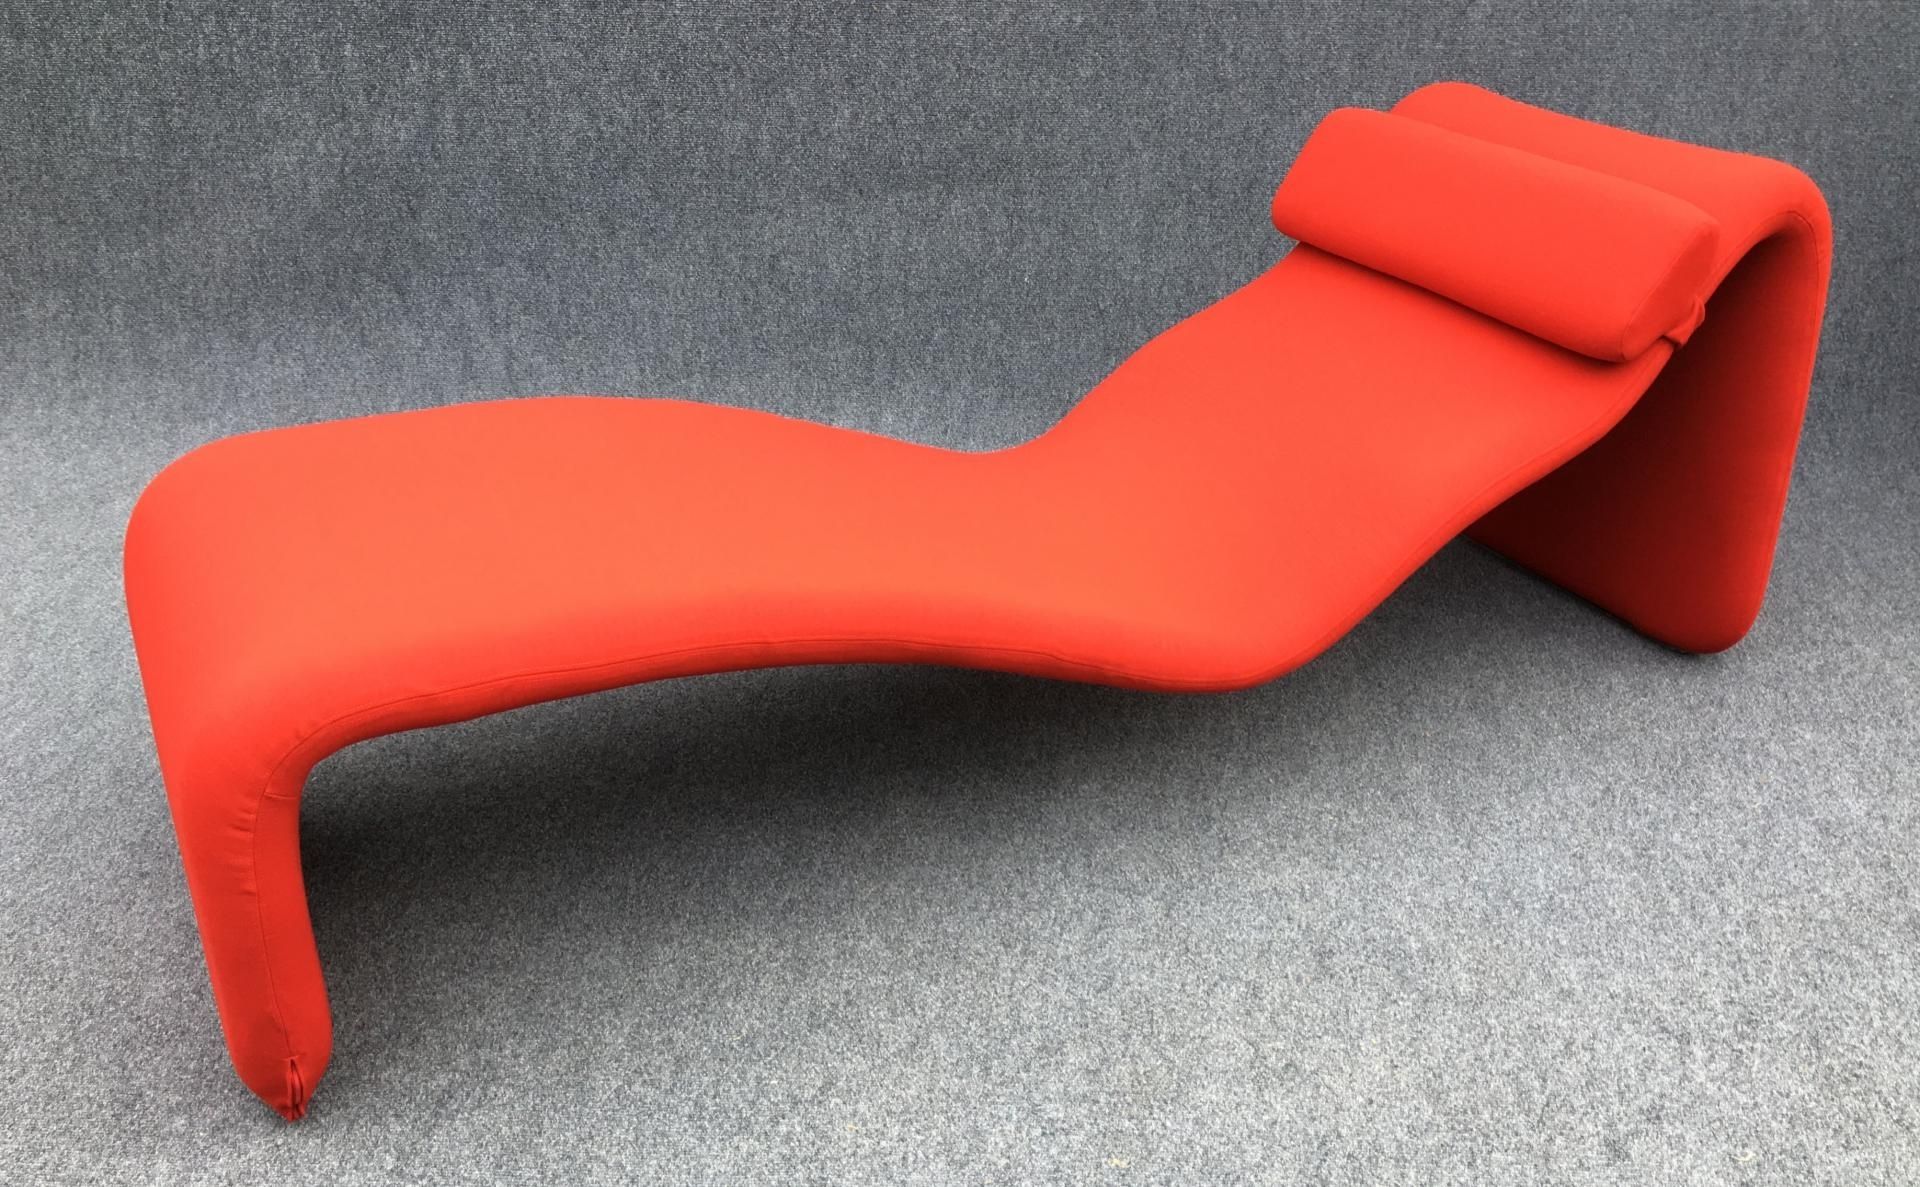 Red Chaises In Recent Red Djinn Chaise Loungeolivier Mourgue For Airborne, 1960s For (Photo 9 of 15)